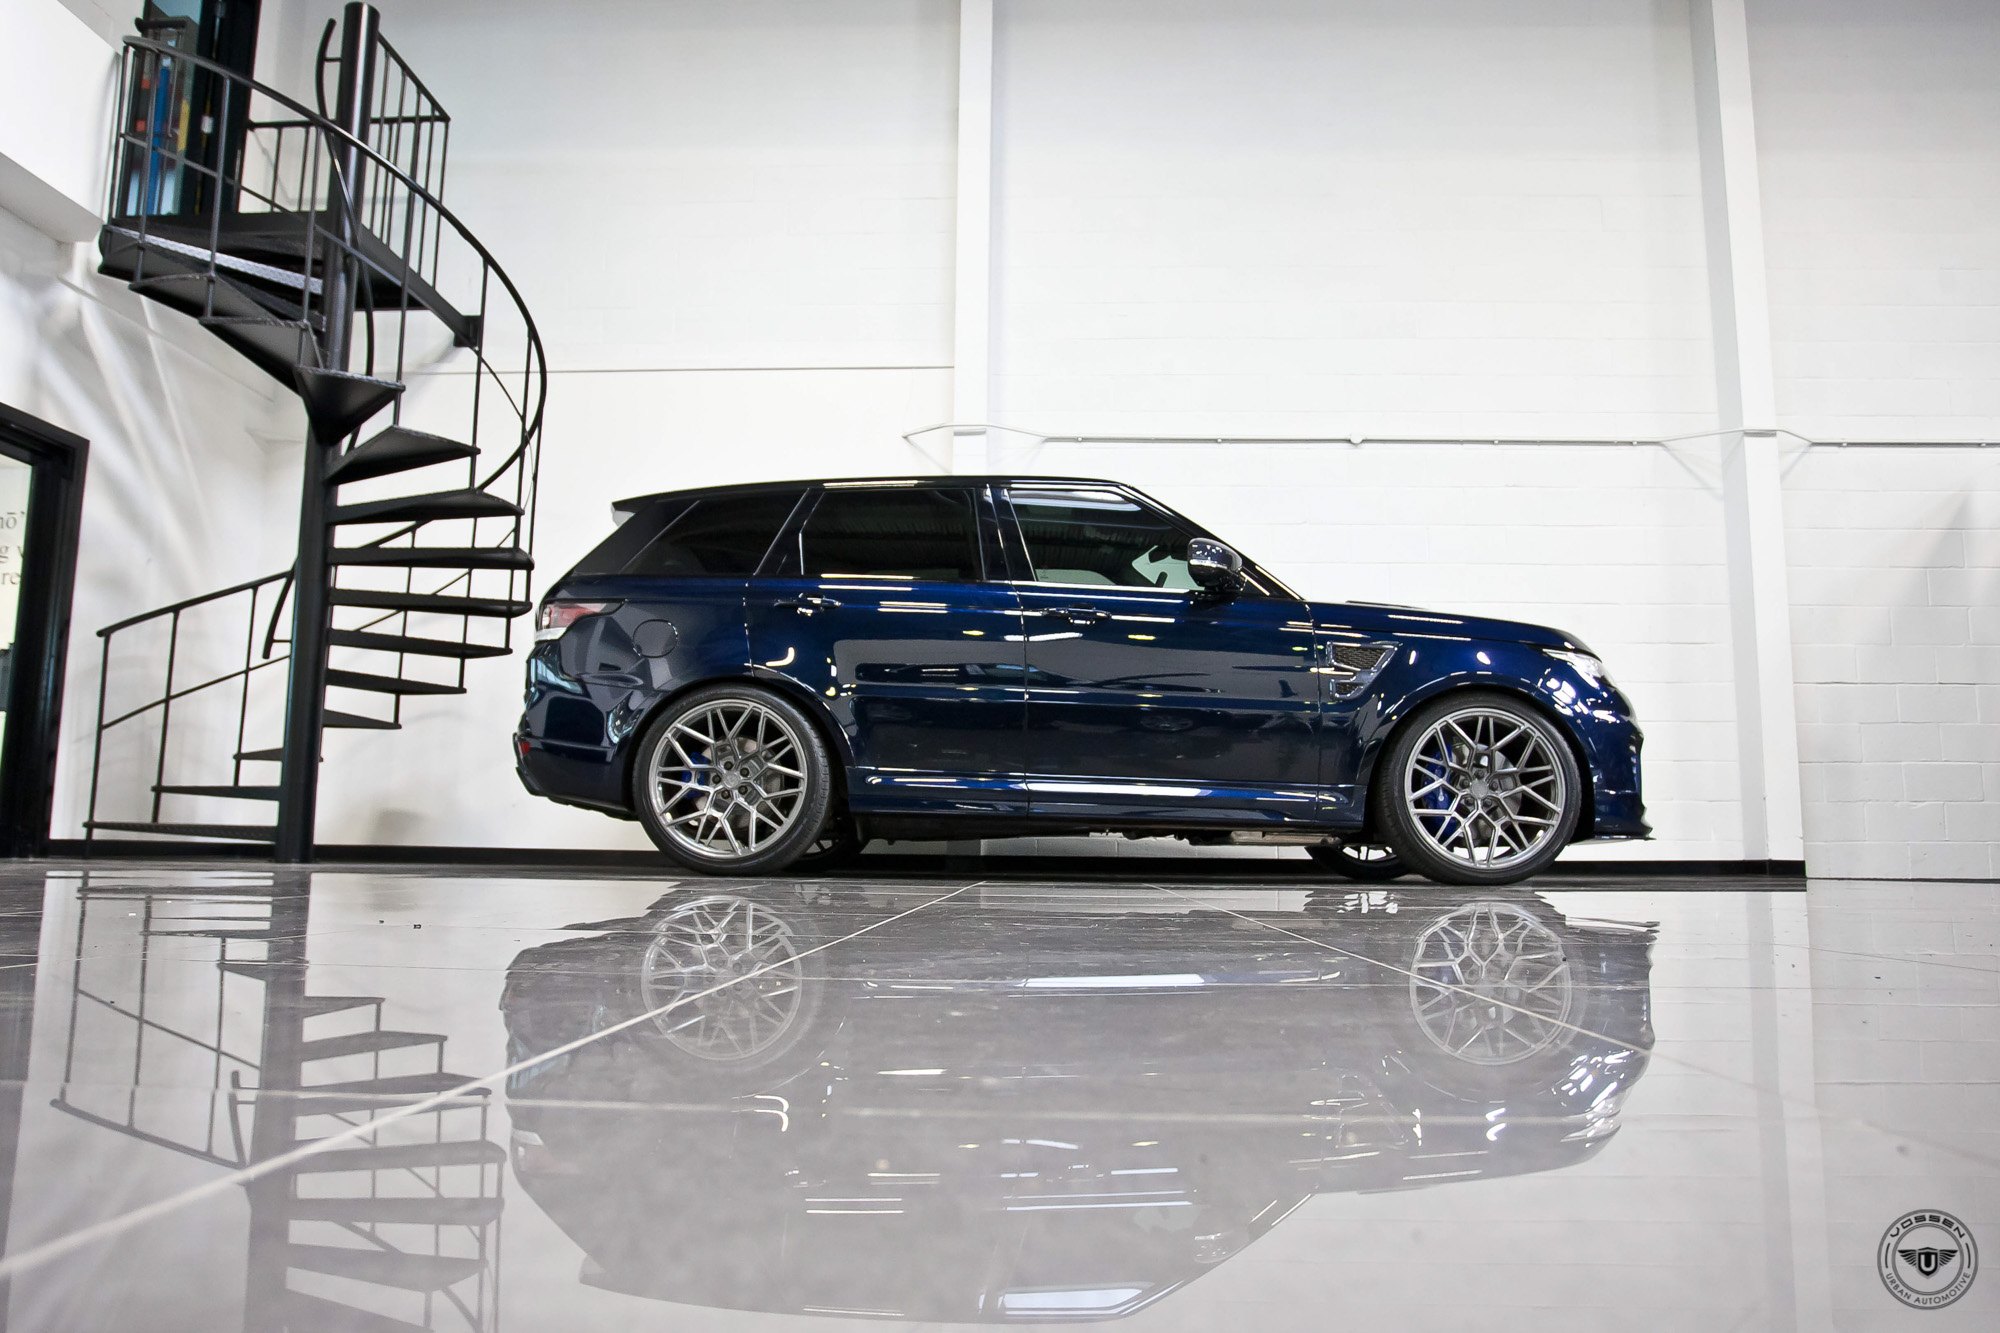 Charcoal Forged Vossen Wheels on Blue Range Rover Sport - Photo by Vossen